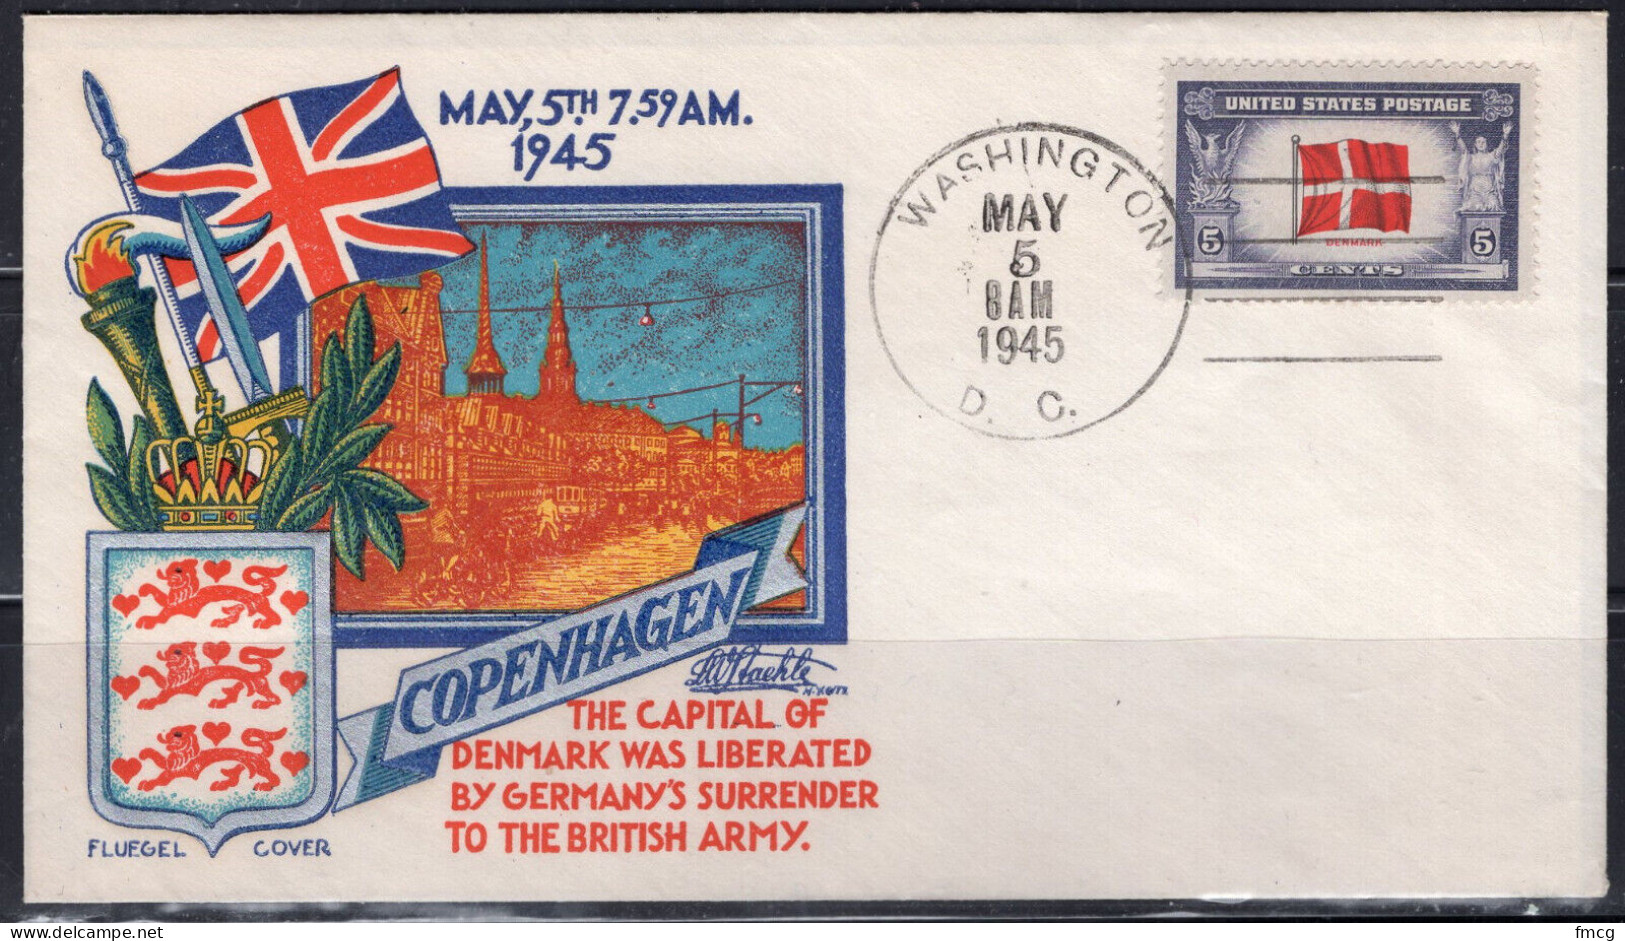 1945 Staehle Cover - World War II, Copenhagen Liberated, Washington DC, May 5 - Lettres & Documents